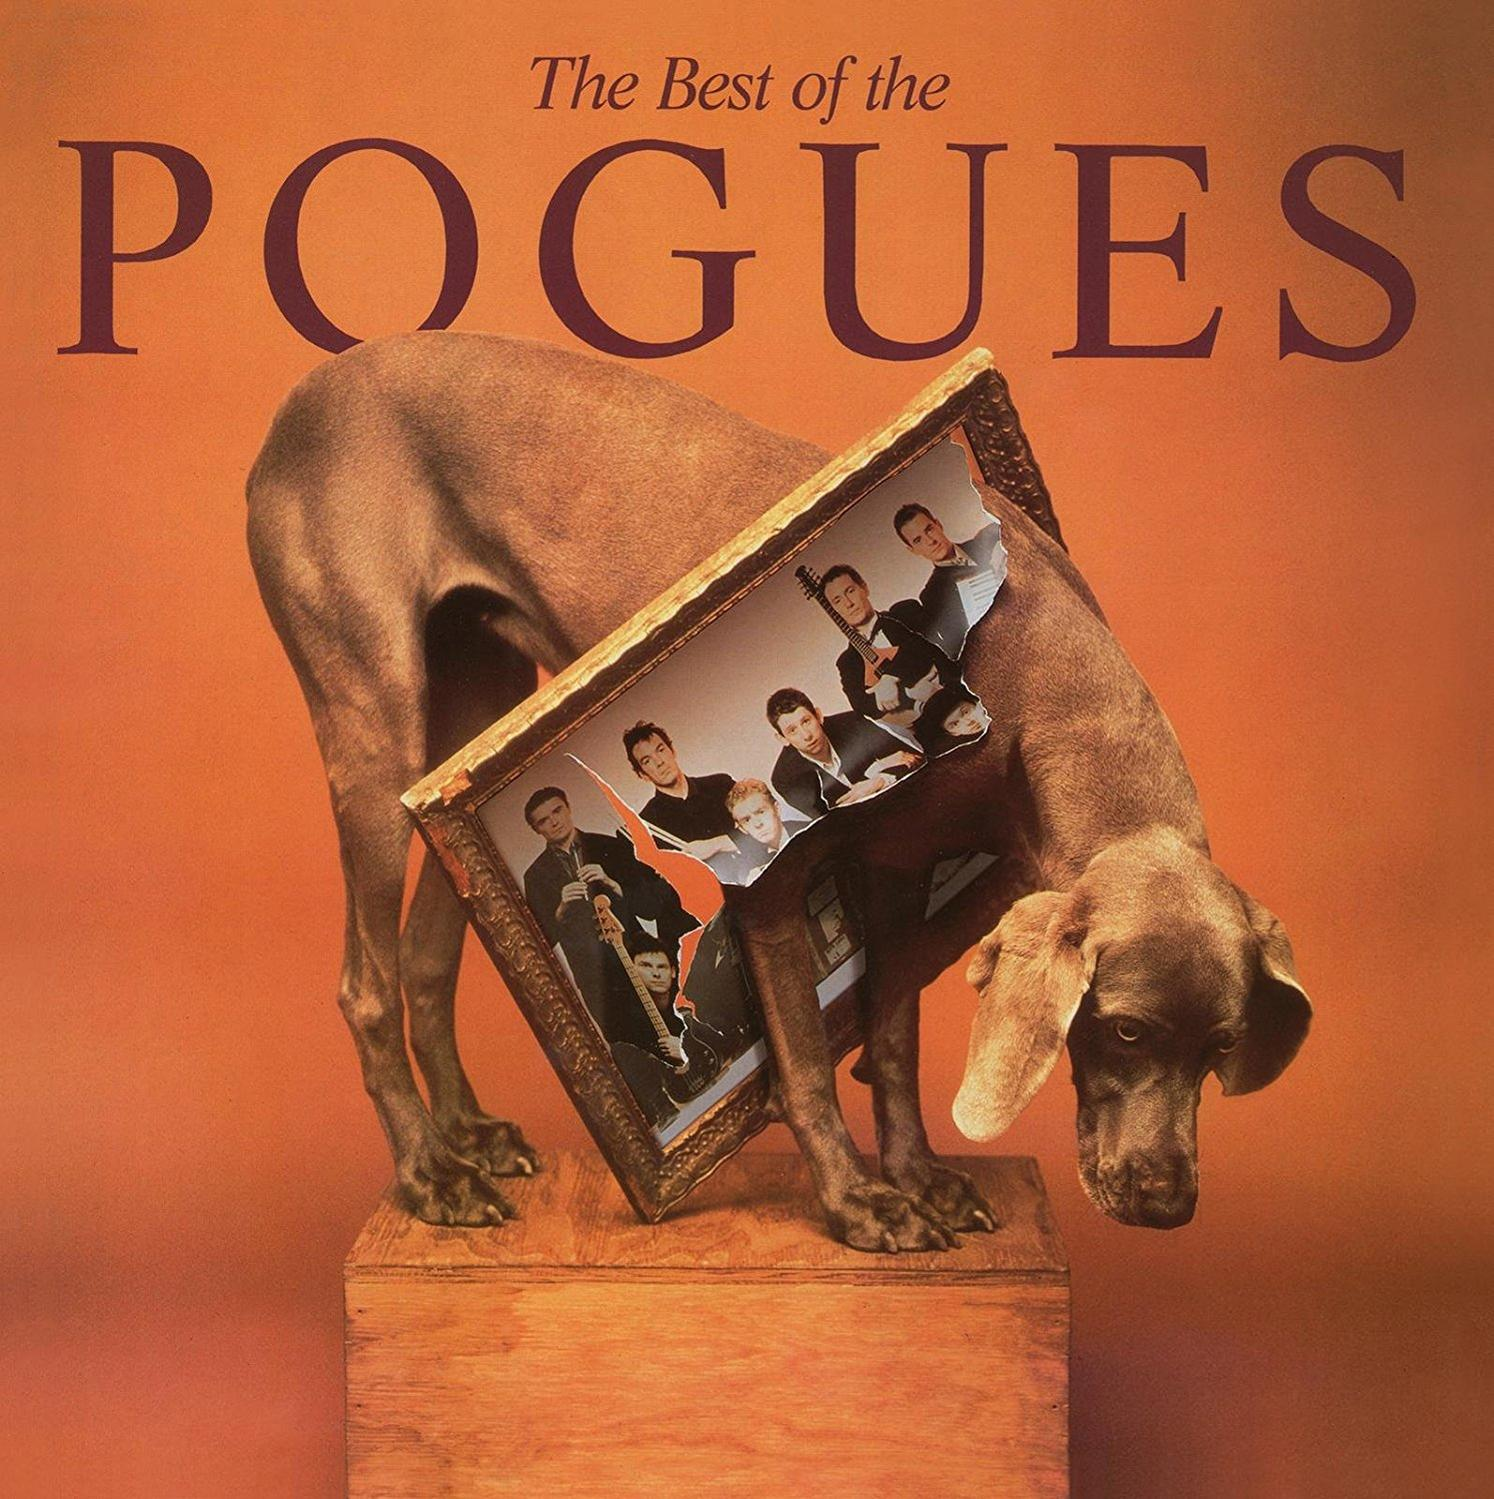 of Pogues - The The The - Pogues Best (Vinyl)